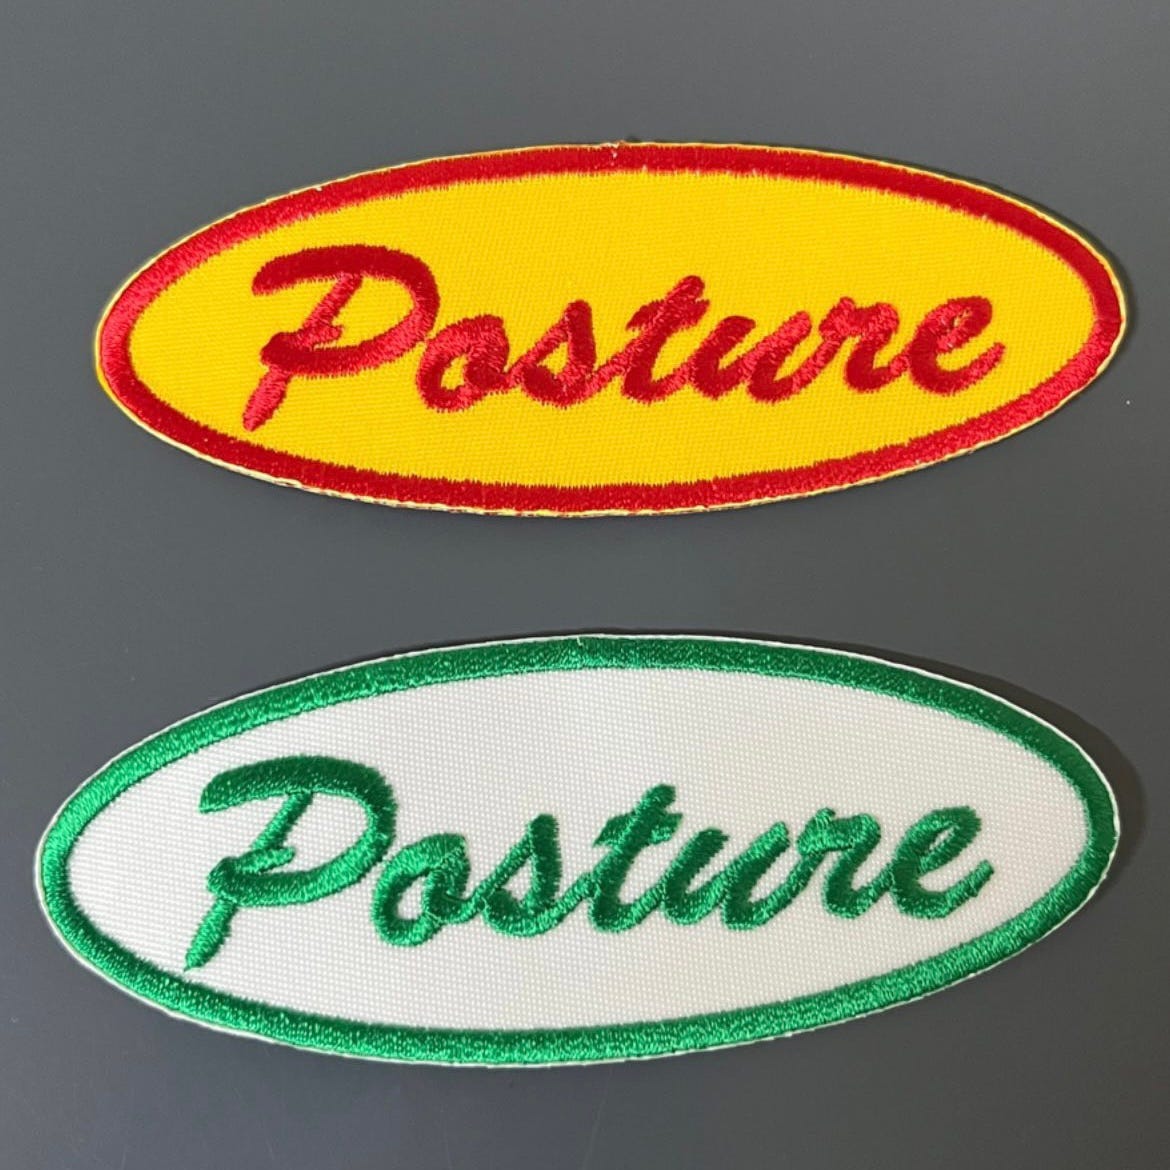 Oval patches that read "Posture"